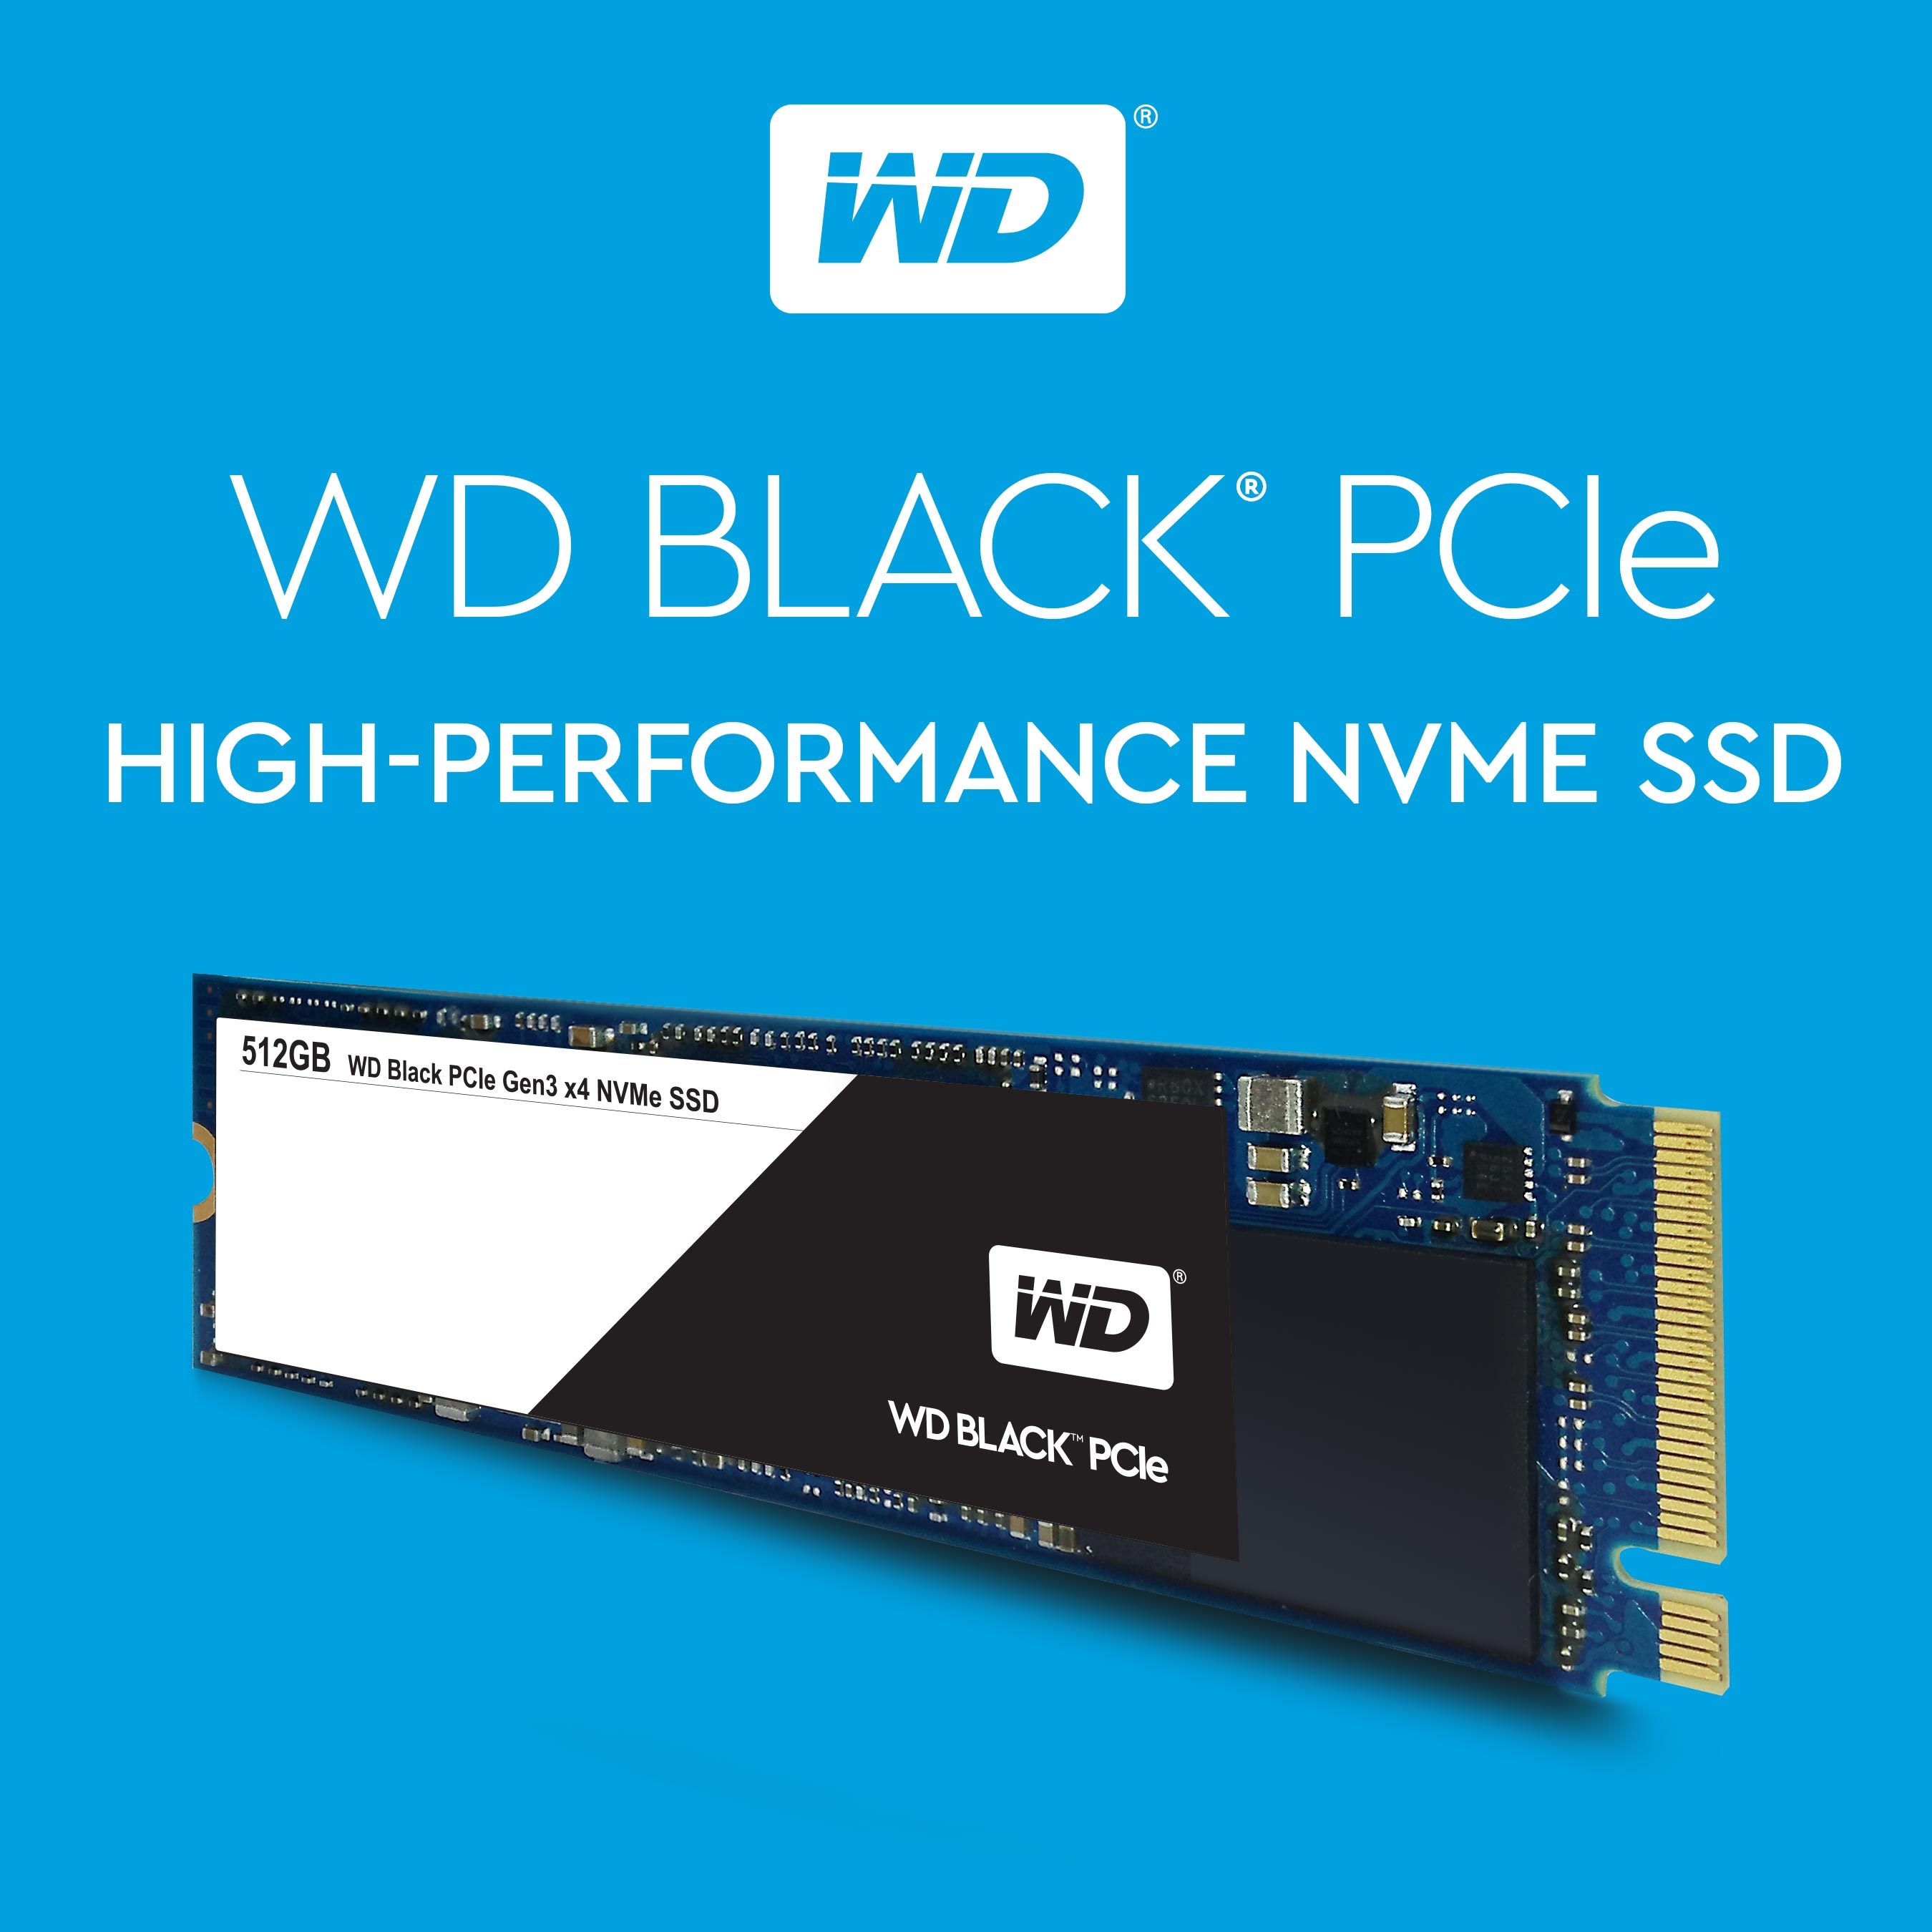 Western Digital Introduces Wd Black Pcie Solid State Drives To